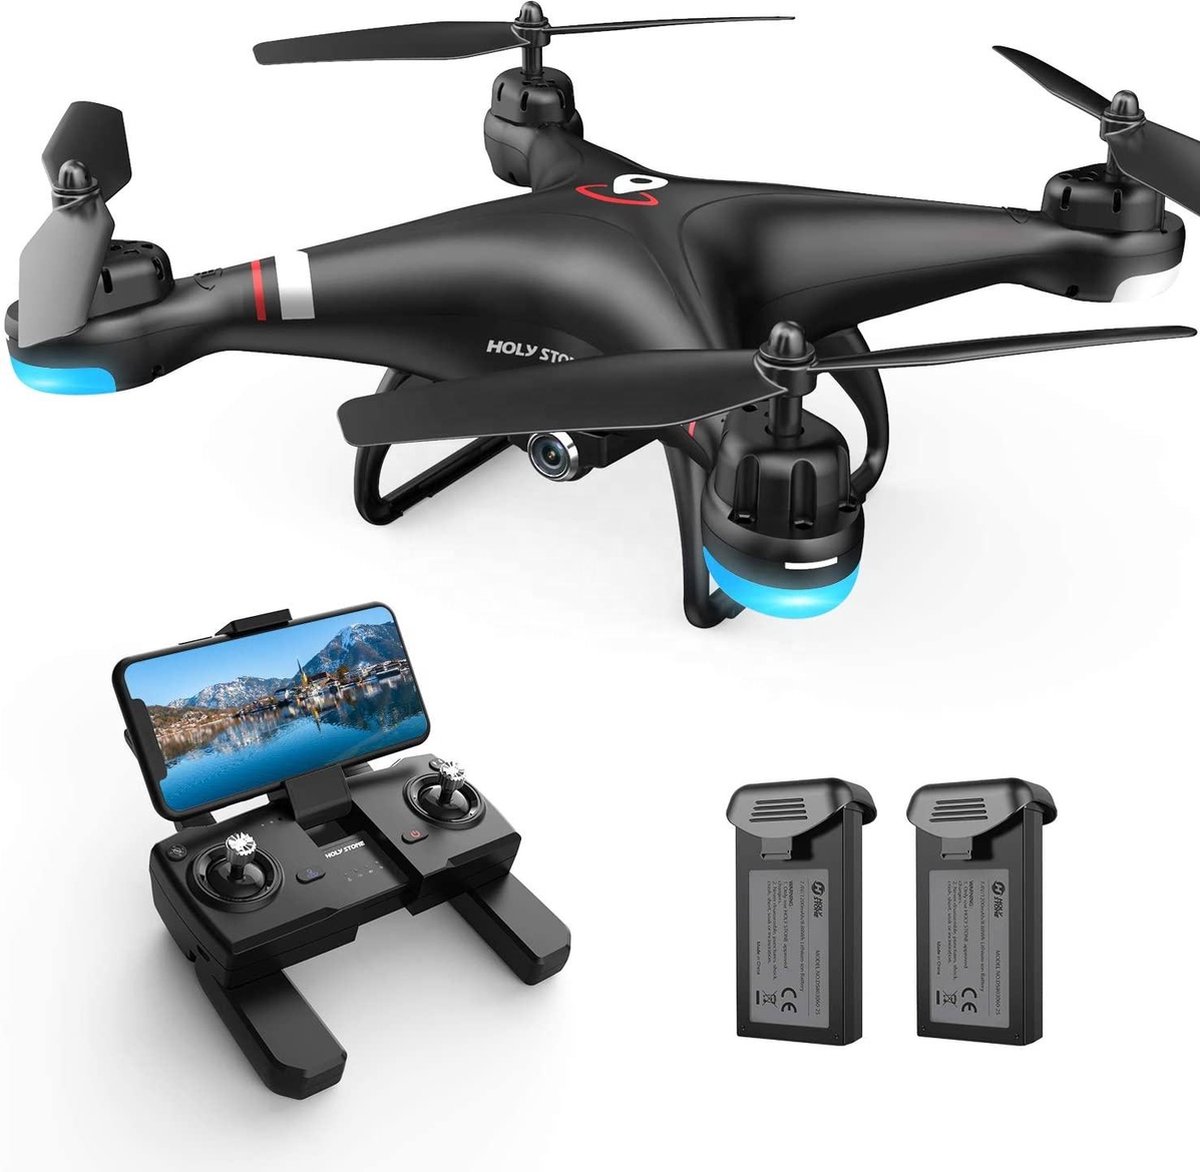 Holy Stone HS110G GPS Drone - Drone met Camera - Stabiele Drone - Full HD Camera - Auto Return Functie - Drones - Gratis extra Accu